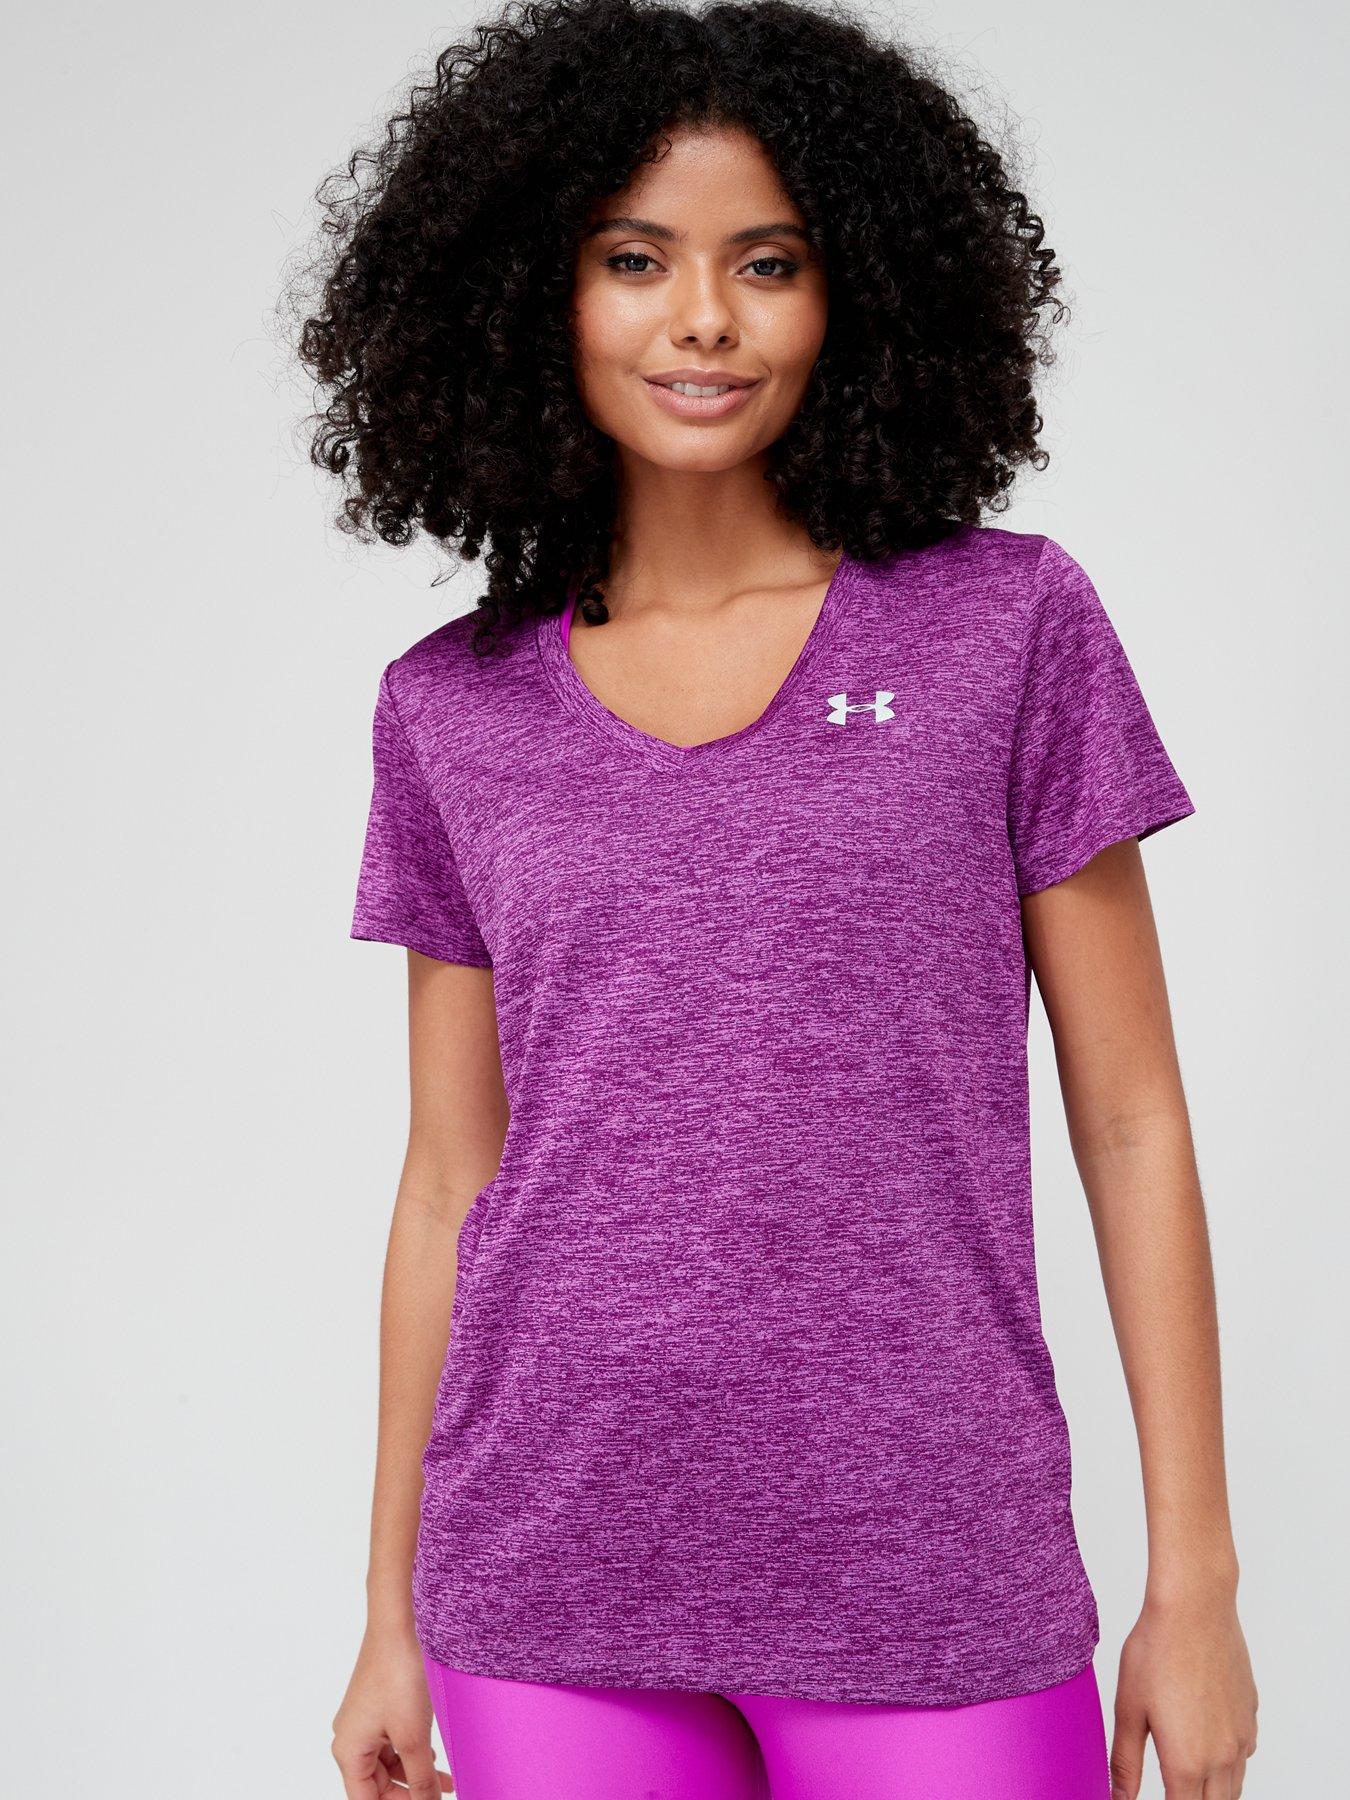 Golf | Under armour Womens sports clothing | Sports & leisure | www.very.co.uk